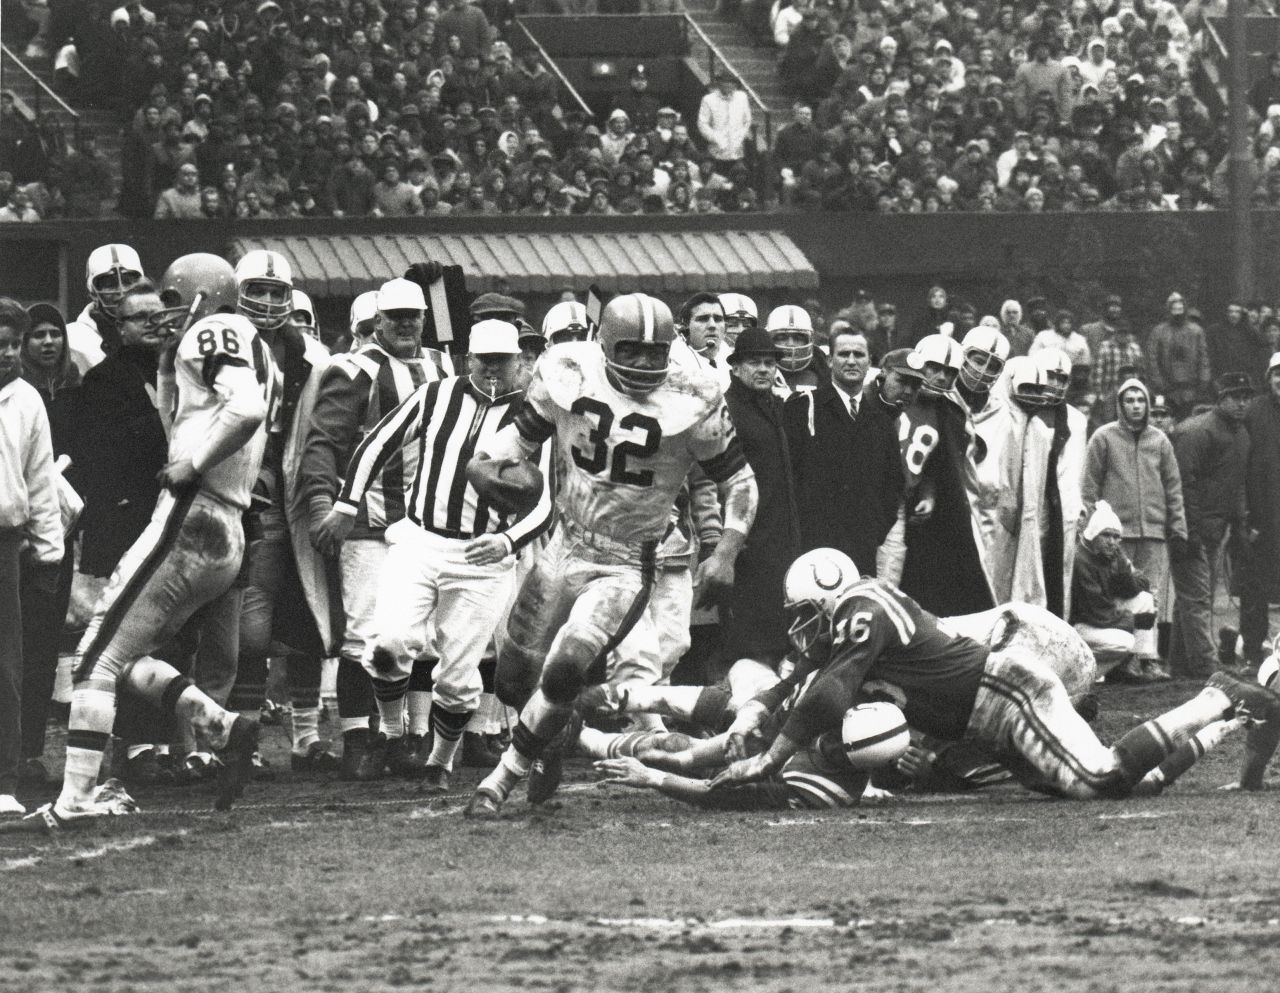 Brown rumbles down the sideline during the NFL Championship Game in December 1964. The Browns smashed the Baltimore Colts 27-0.